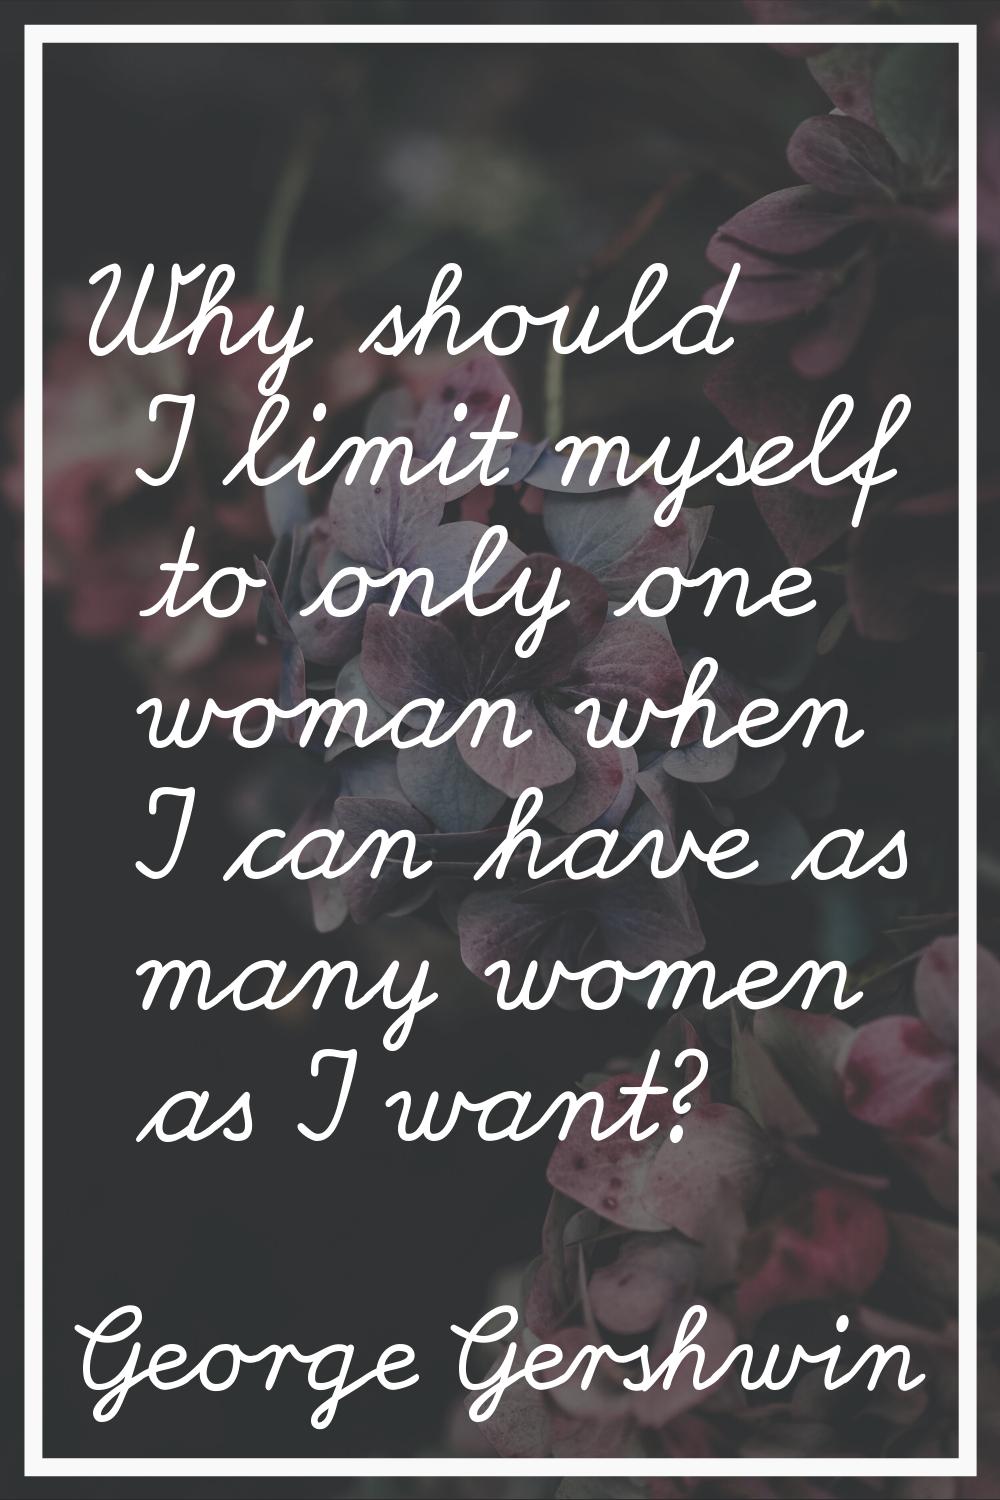 Why should I limit myself to only one woman when I can have as many women as I want?